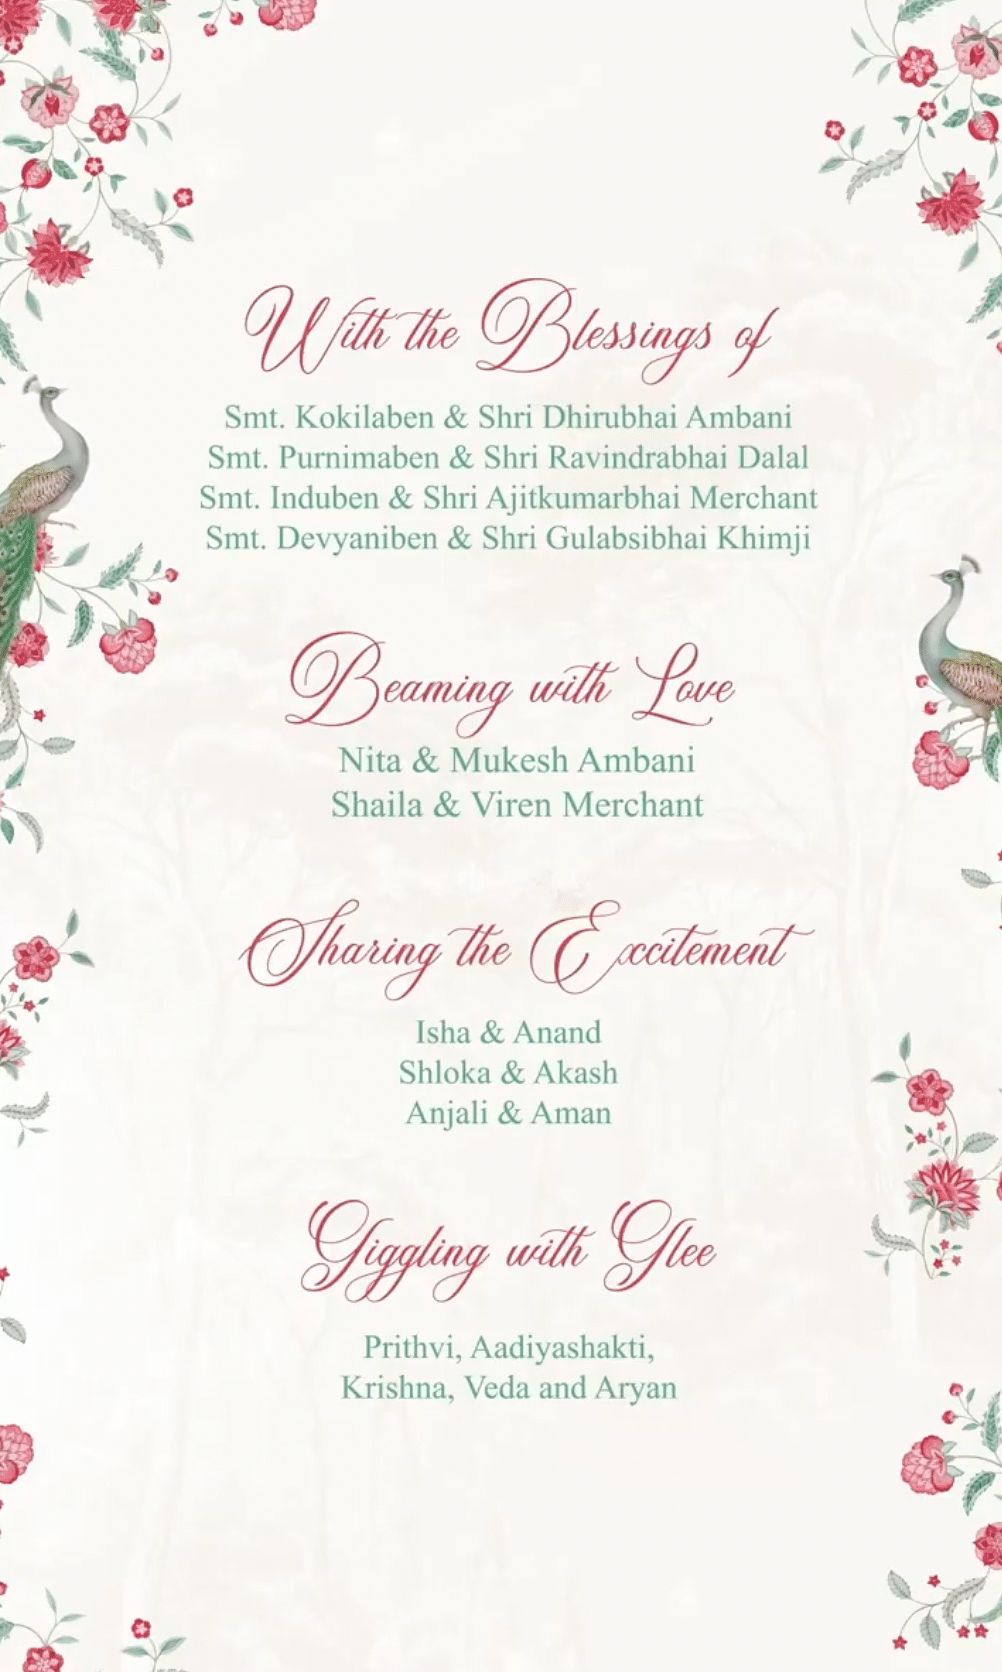 Anant & Radhika's pre-wedding celebrations will take place from March 1-3 in Gujarat's Jamnagar.